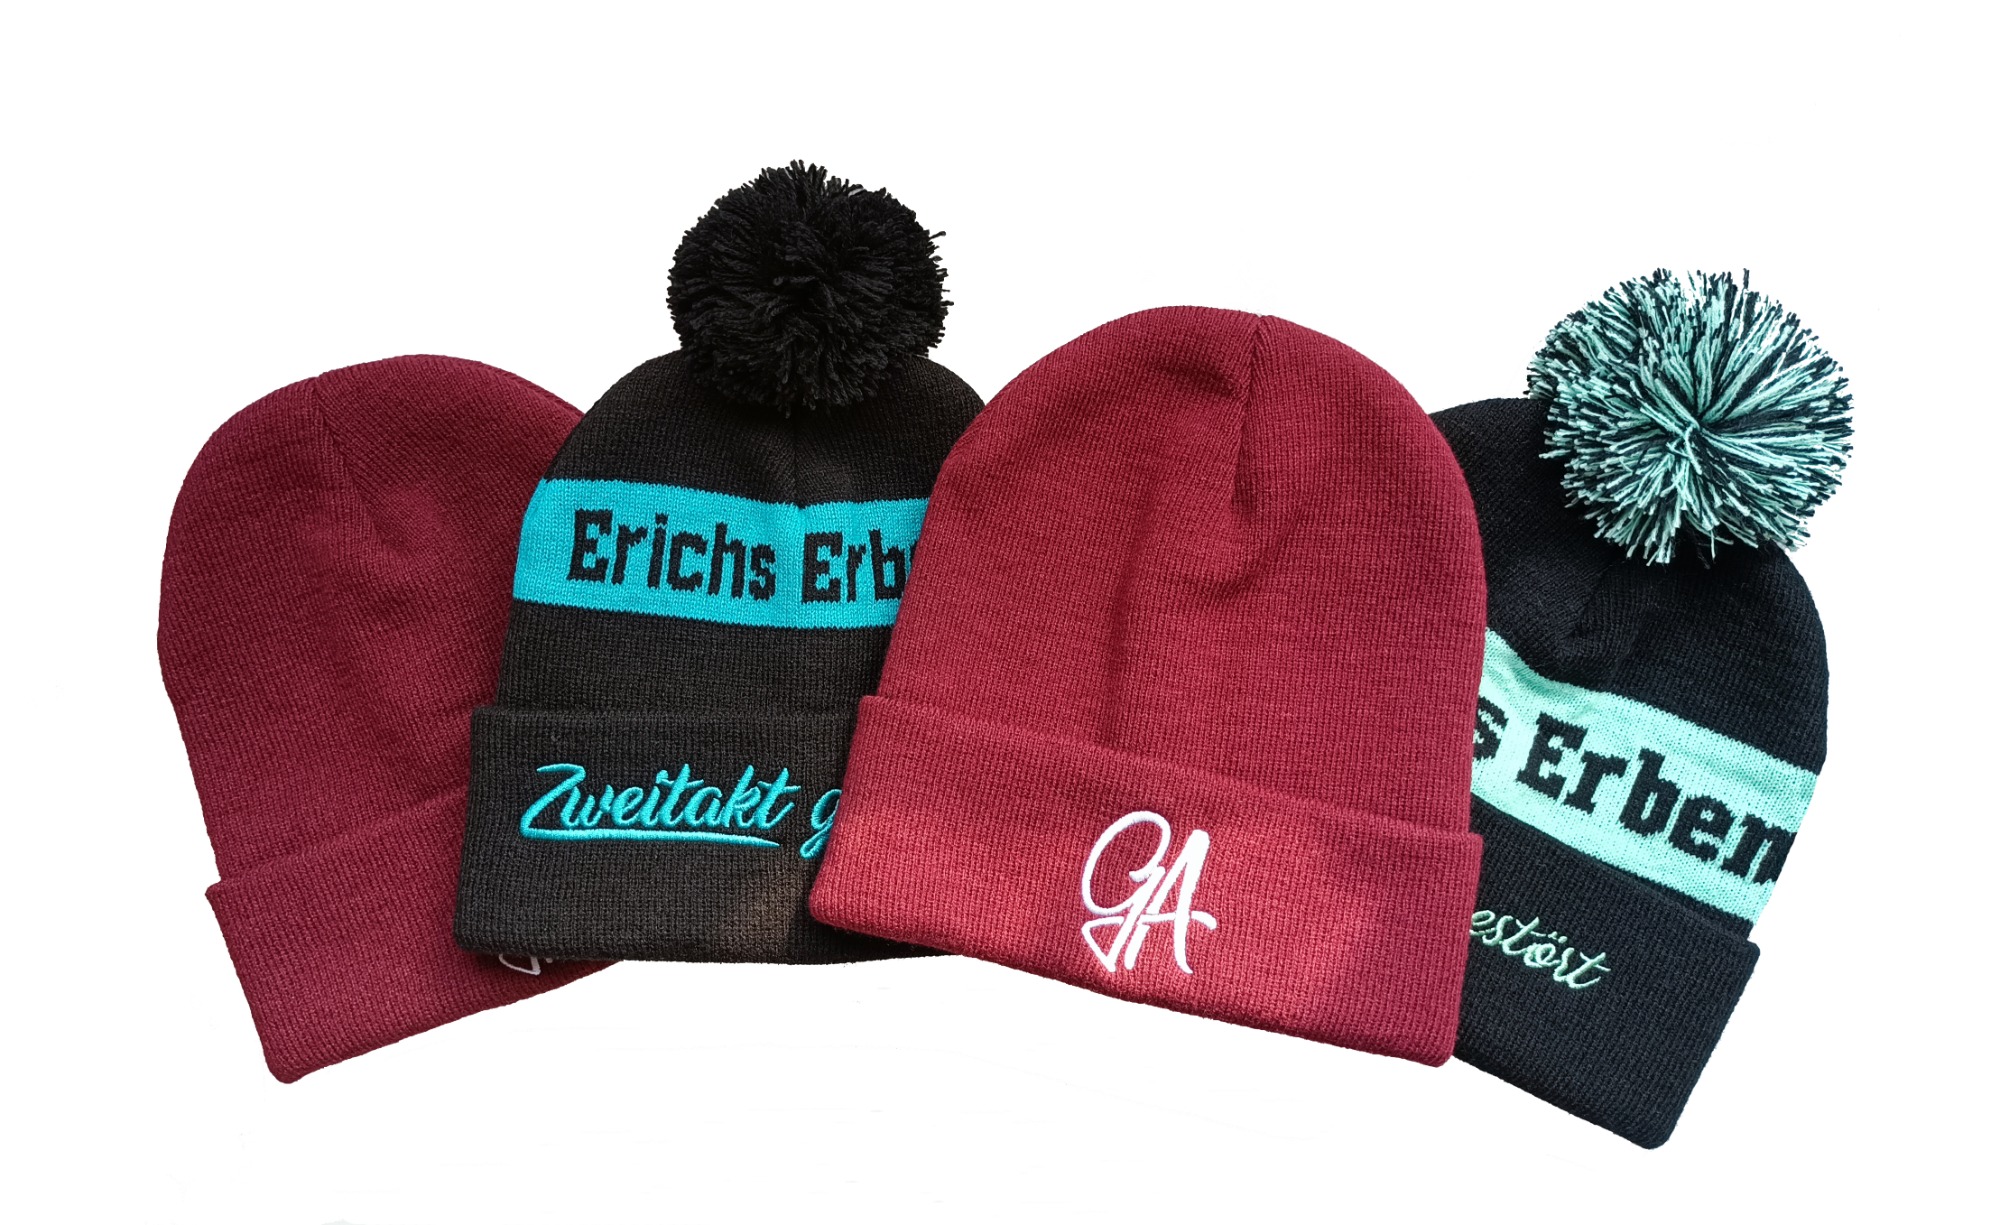 Custom beanie hat with jacquard & embroidery logo